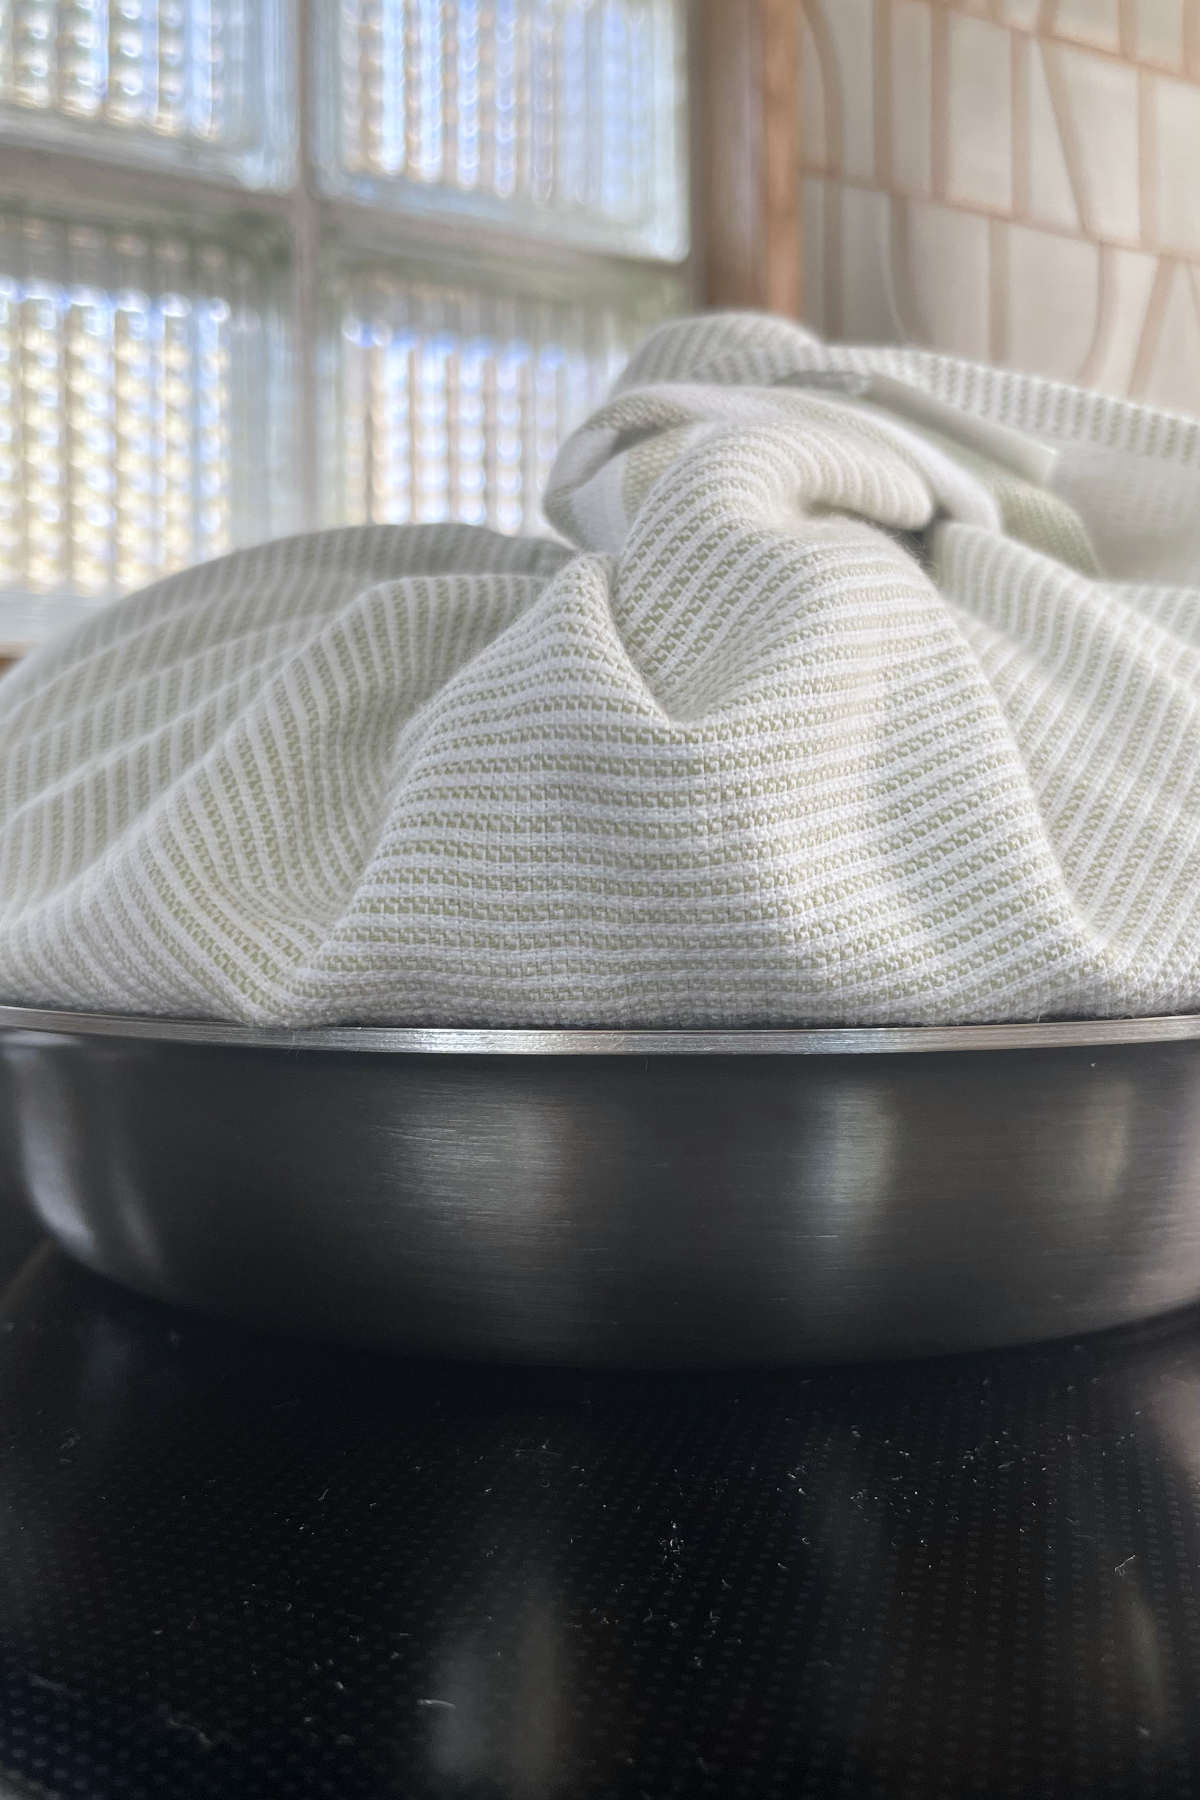 Fry pan topped with a lid that is wrapped in a clean kitchen towel.